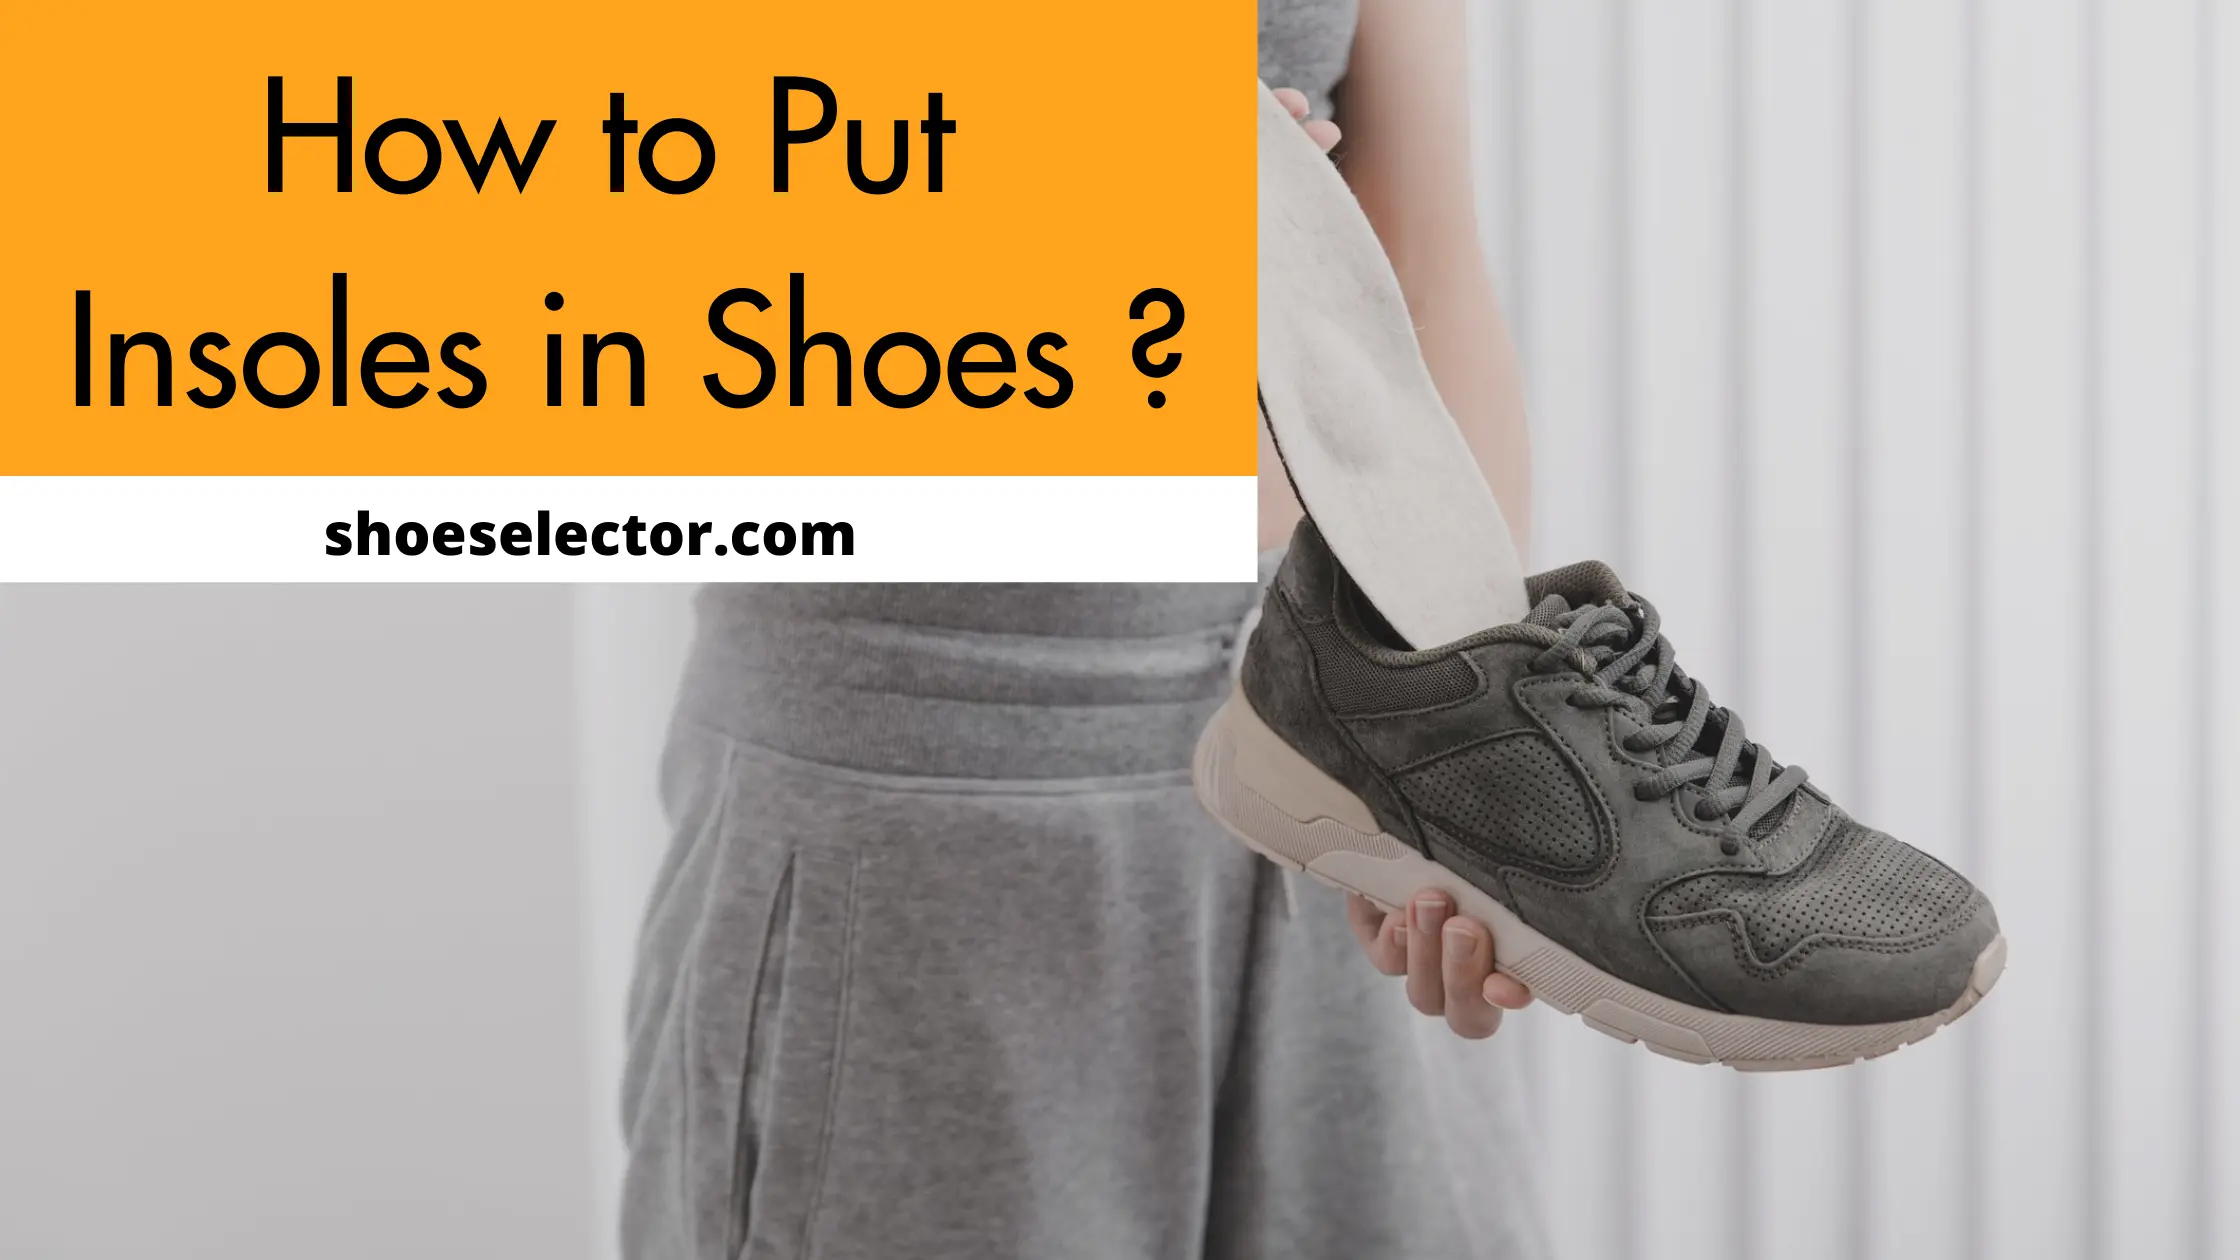 How To Put Insoles In Shoes? Easy & Quick